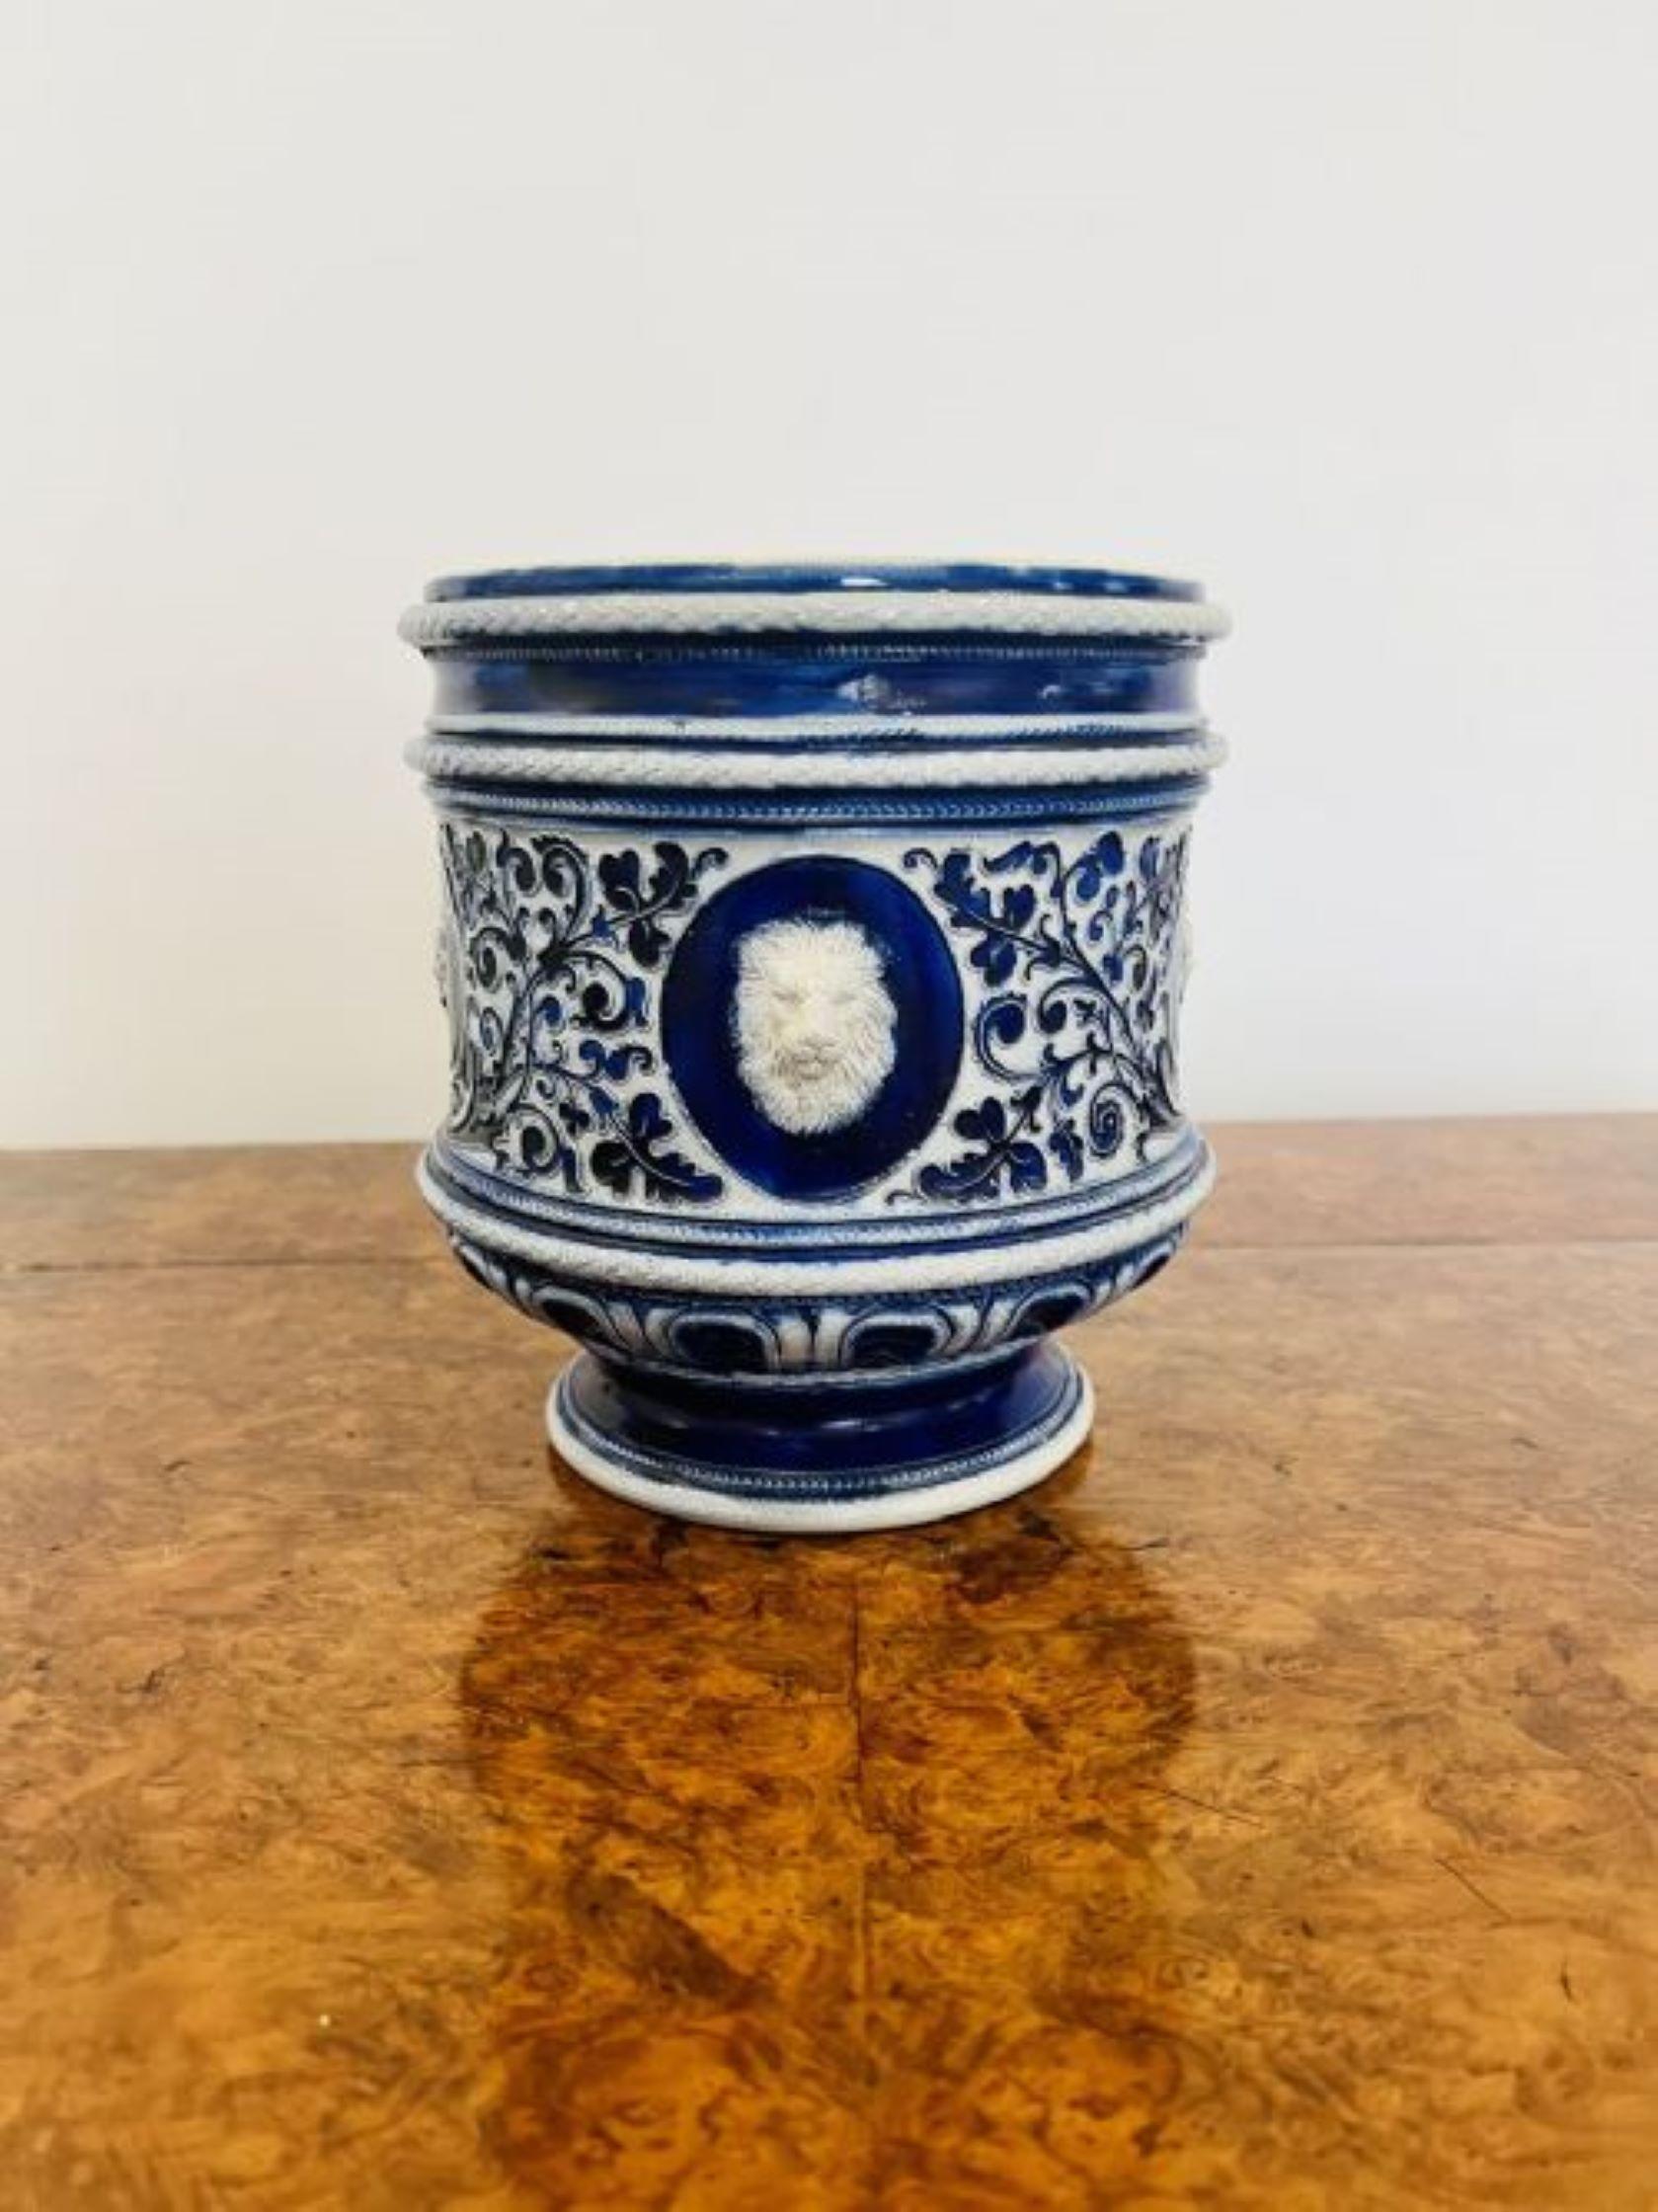 Stunning quality antique Victorian salt glazed German jardiniere having a quality antique German slat glazed jardiniere in blue and white colours decorated with masks and vines. 